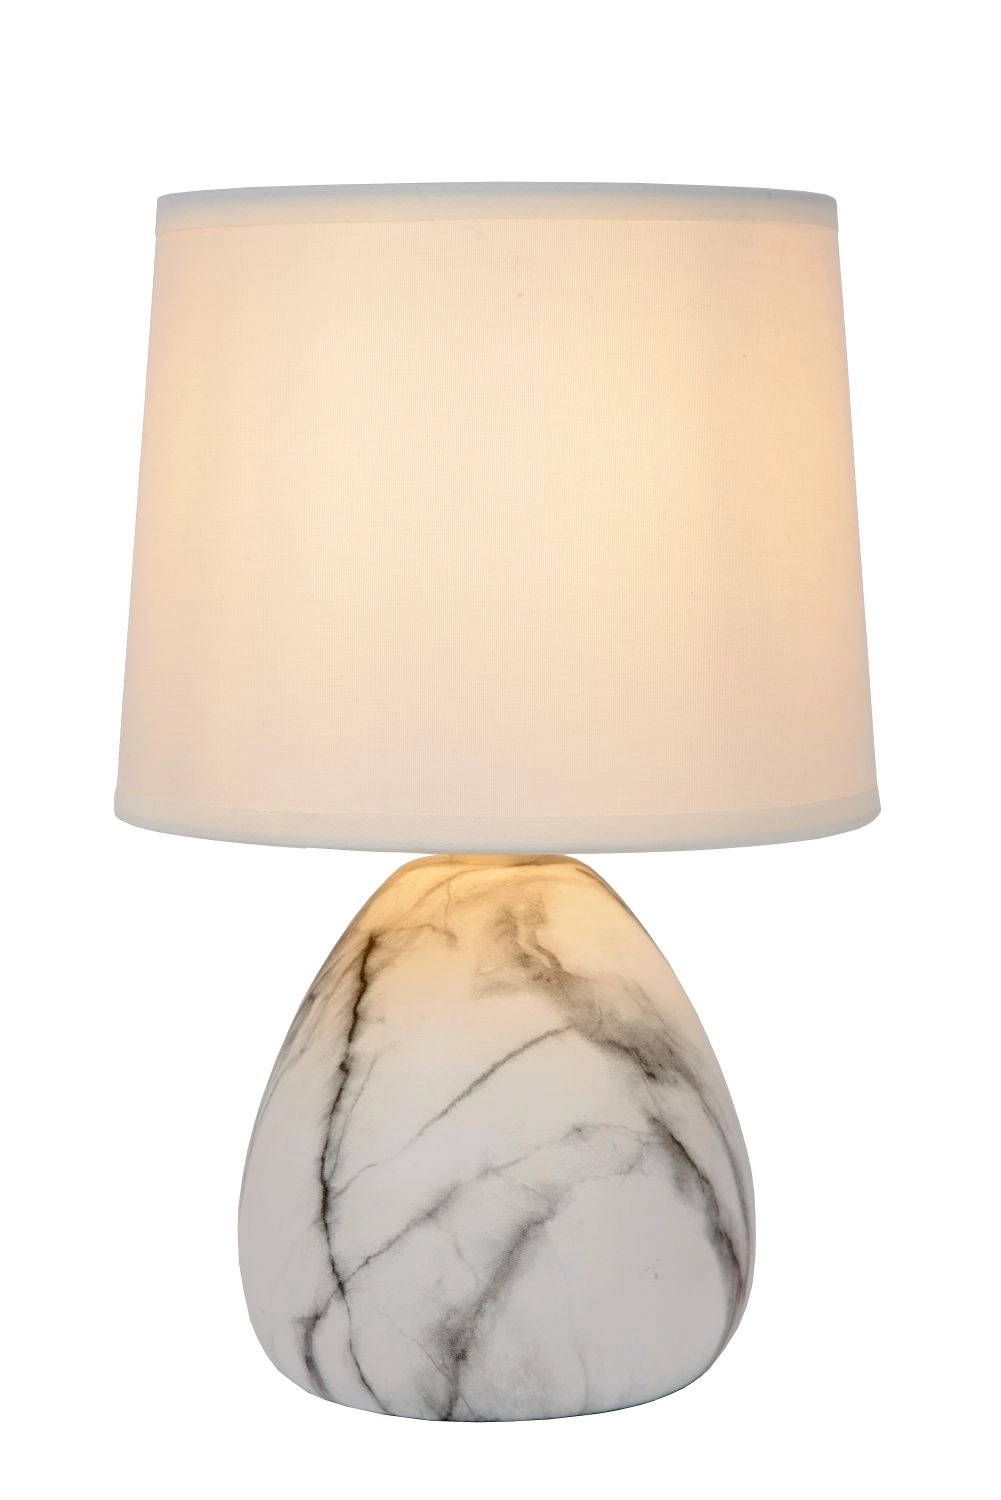 LU 47508/81/31 Lucide MARMO - Table lamp - Ø 16 cm - 1xE14 - White